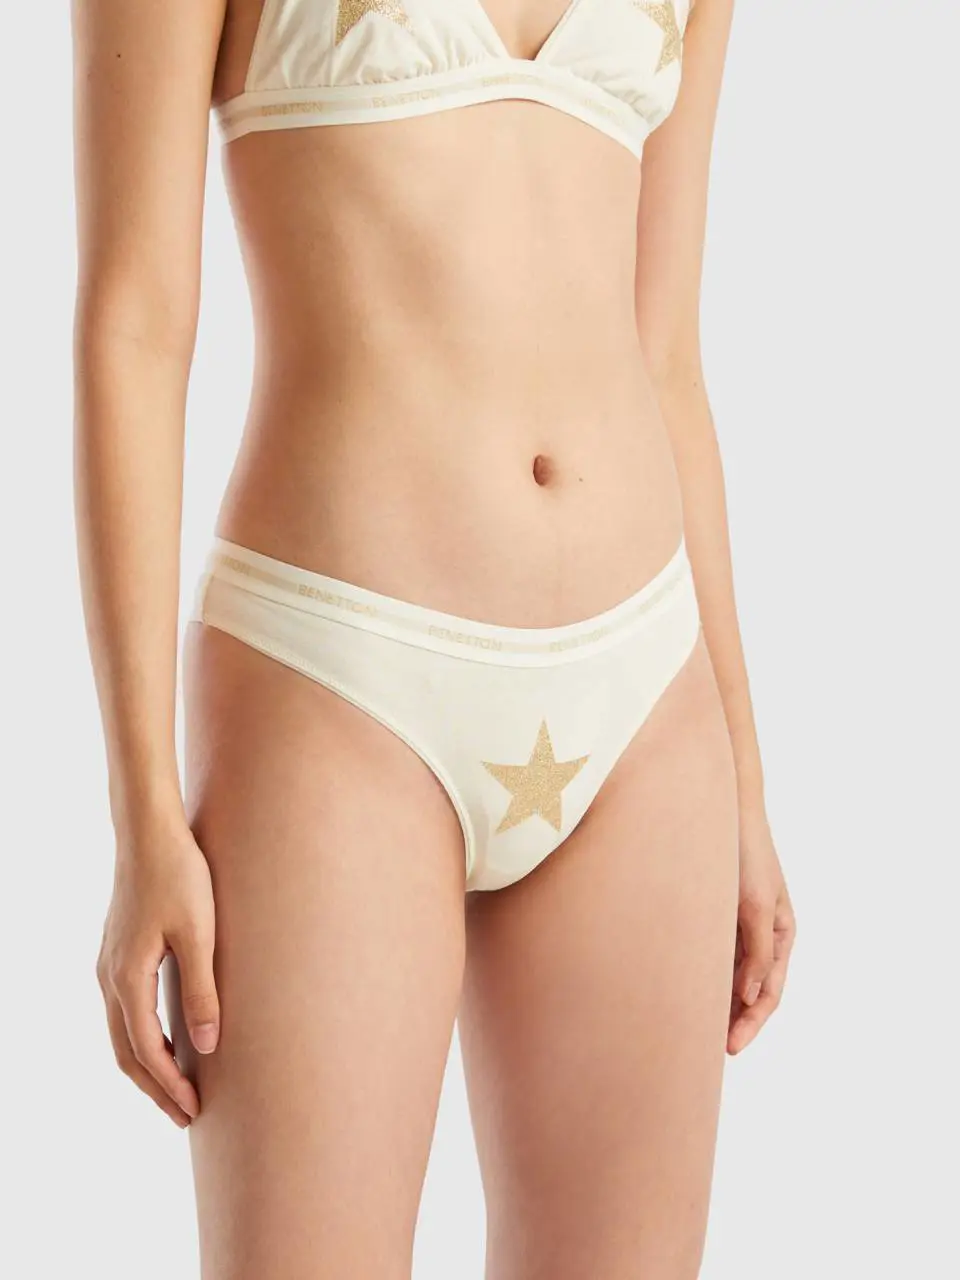 Benetton thong with glittery star. 1